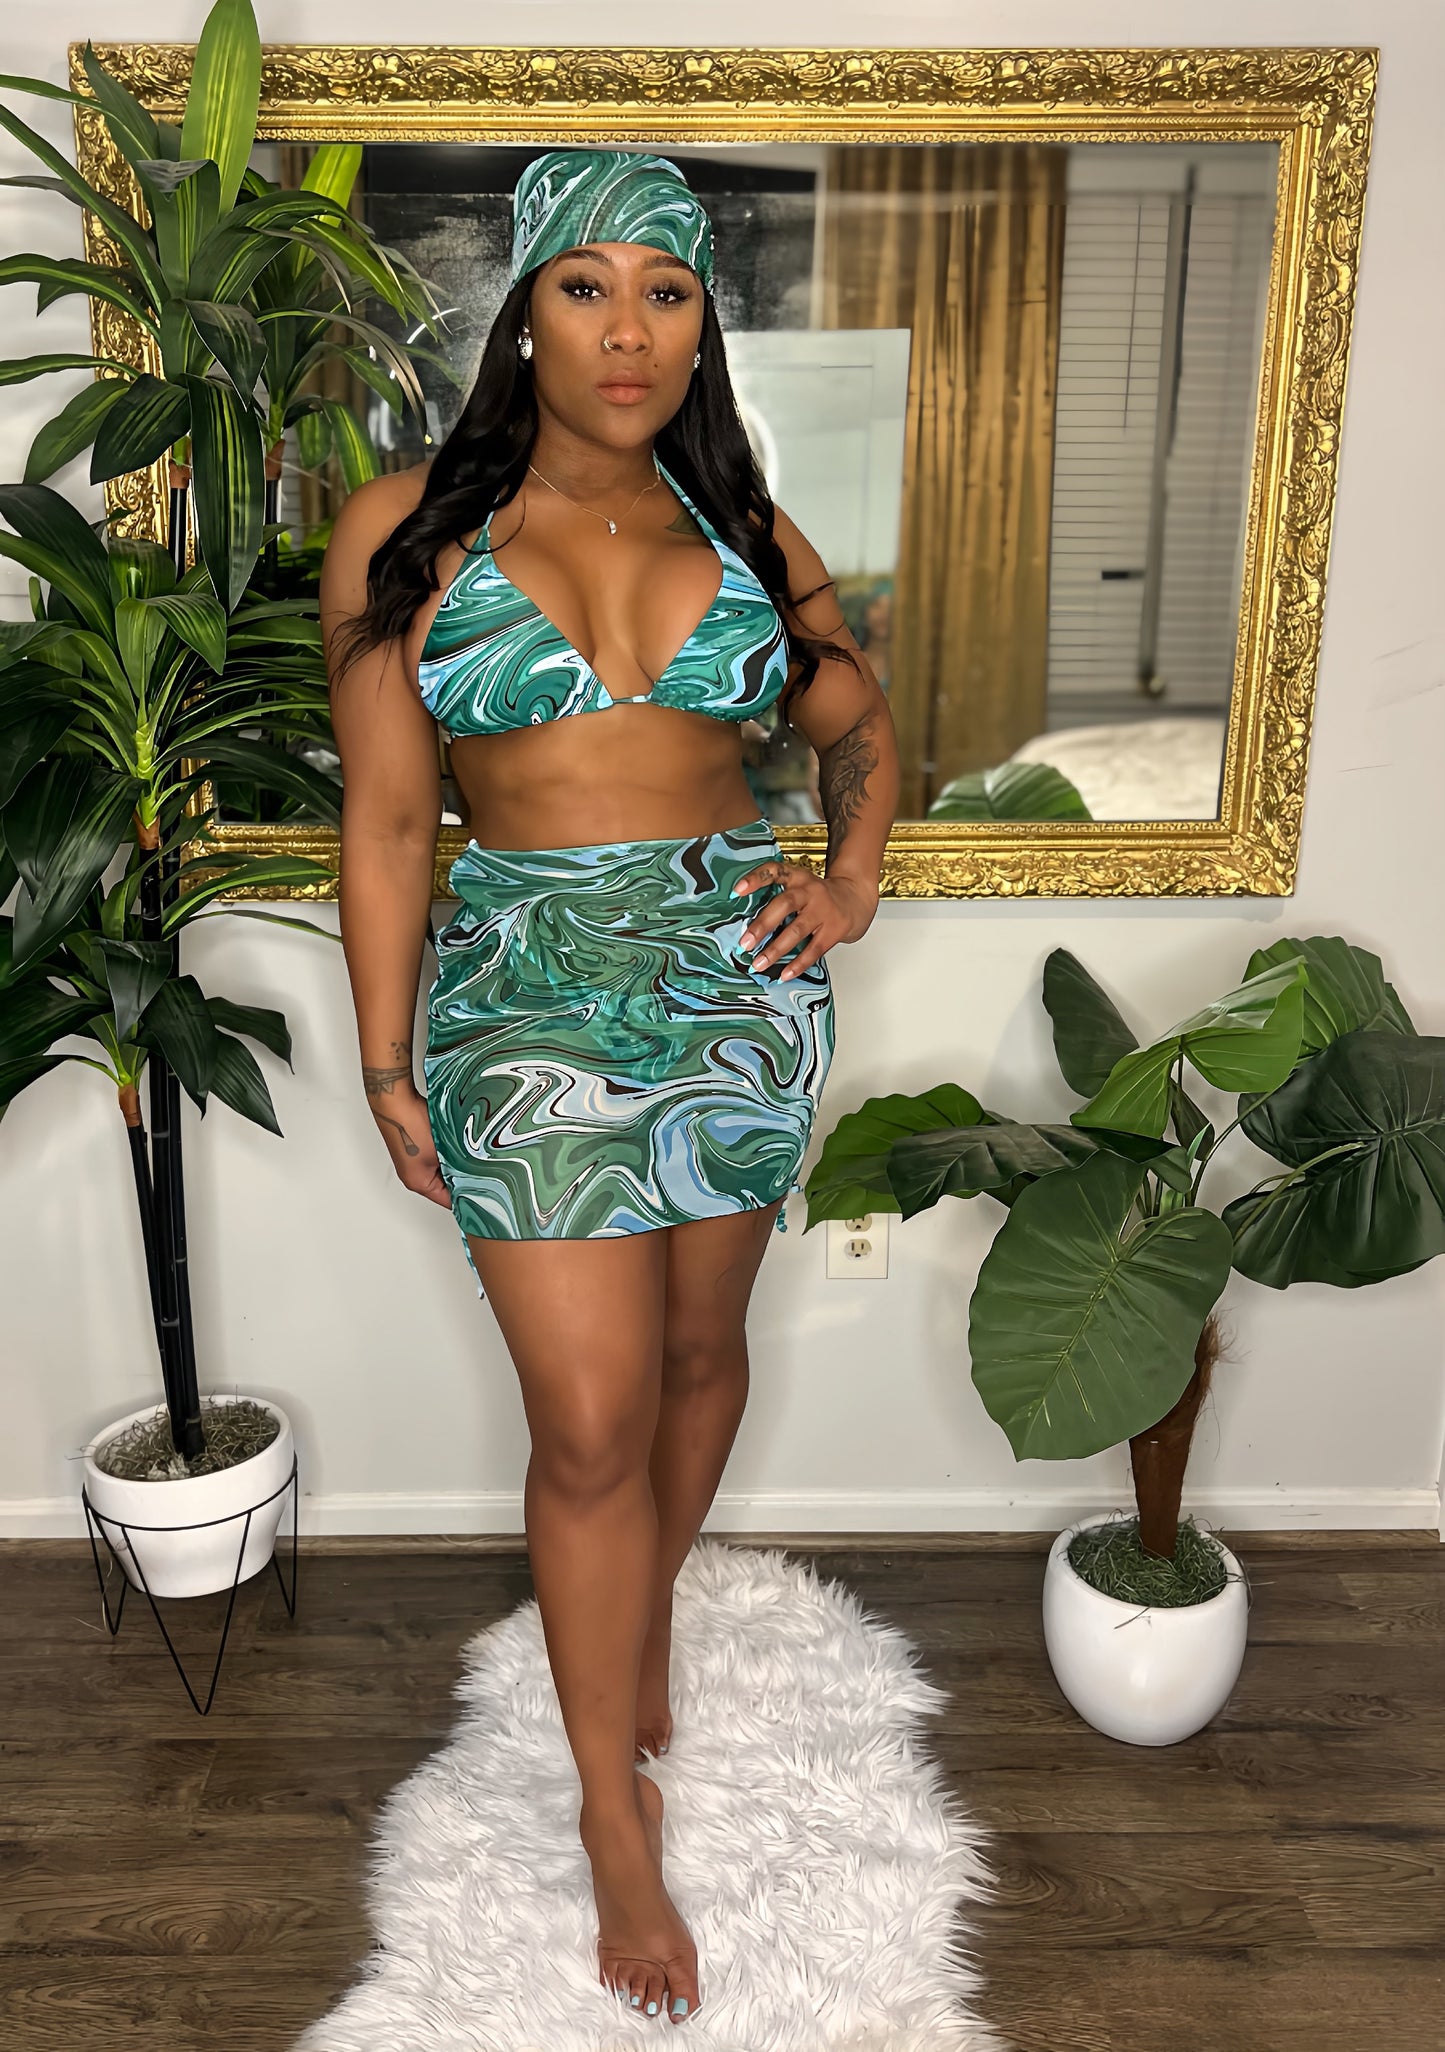 Marble Me Green 4 Piece Cover Up Swimsuit Set